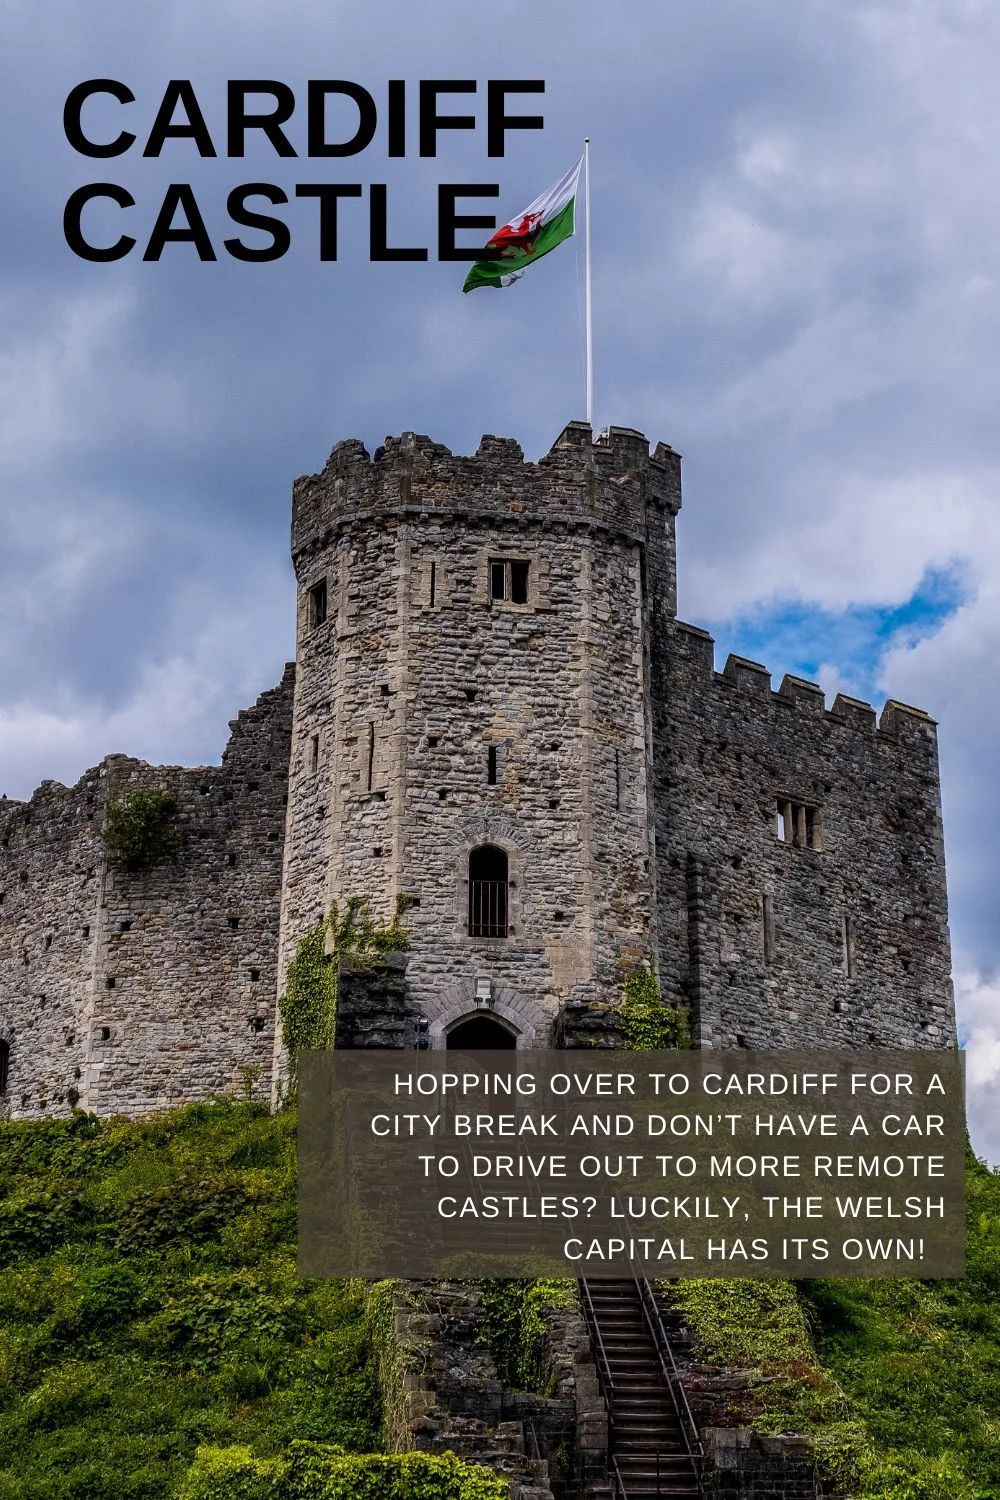 Cardiff Castle - Best castles to visit in Wales